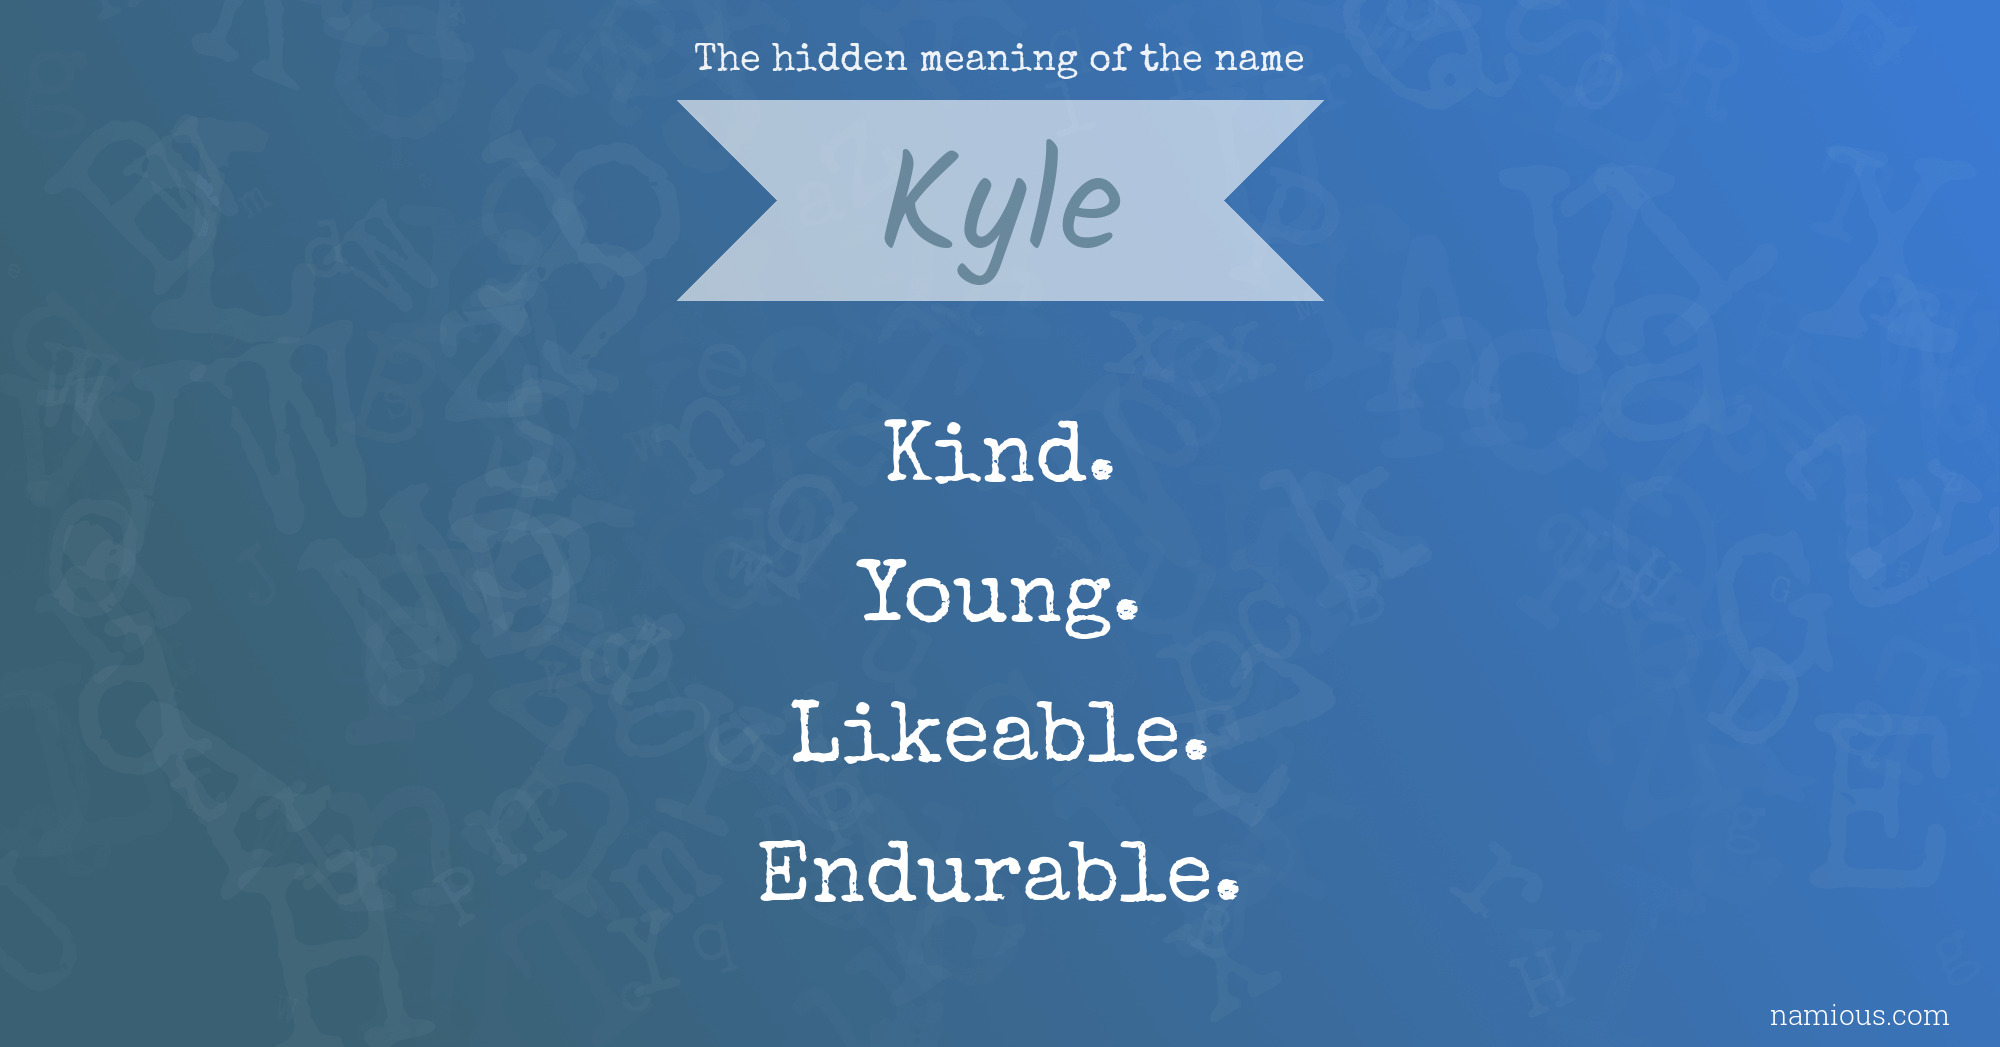 The hidden meaning of the name Kyle